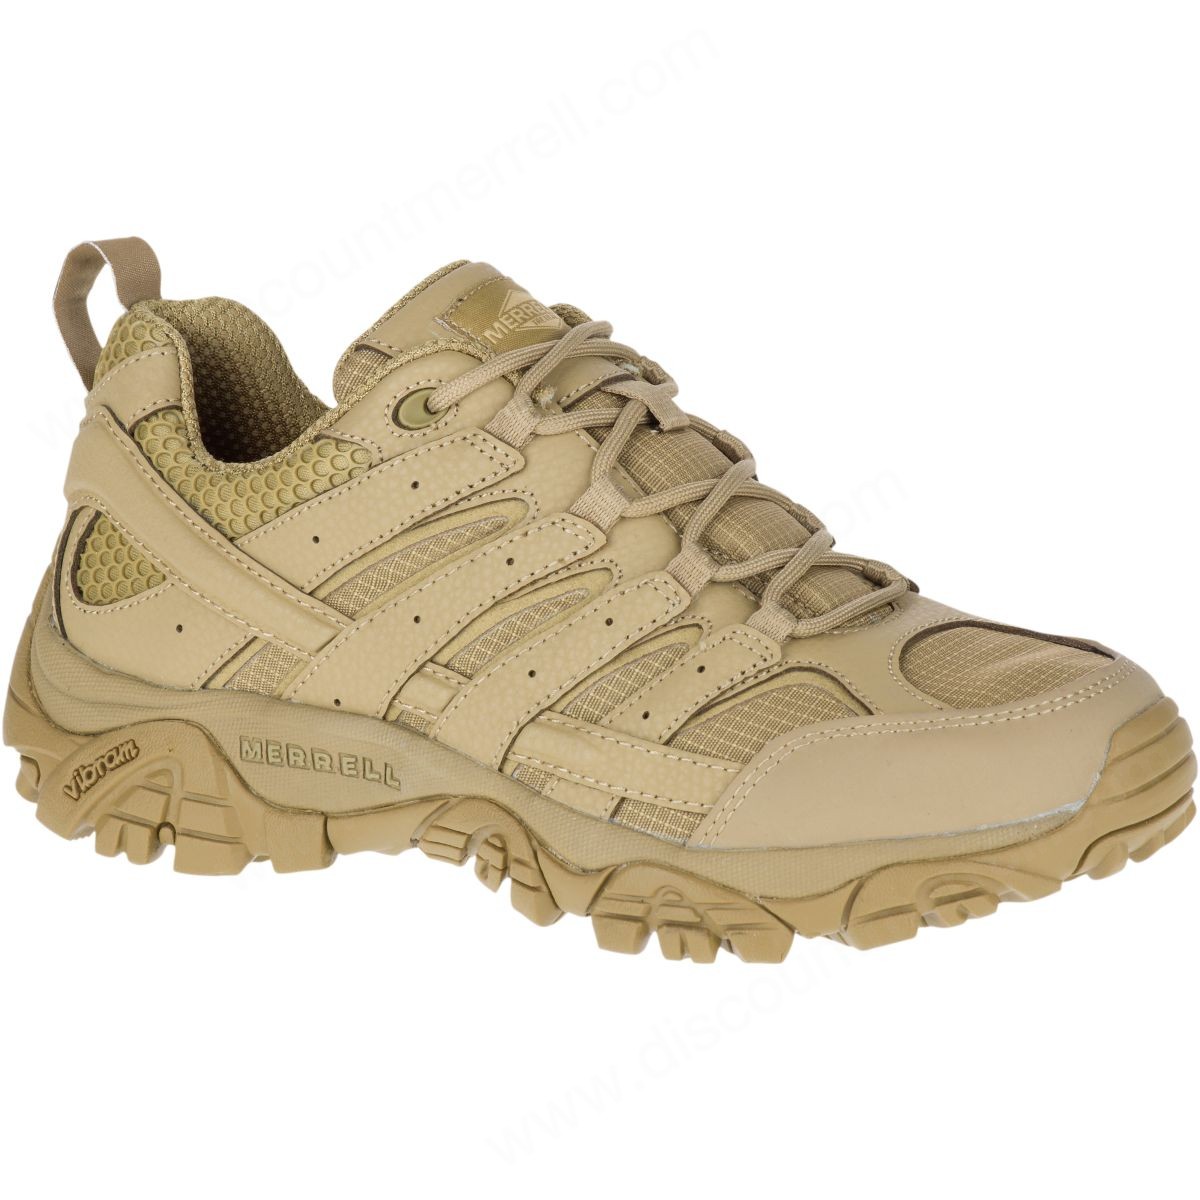 Merrell Woman's Moab Tactical Sneaker Coyote - -0